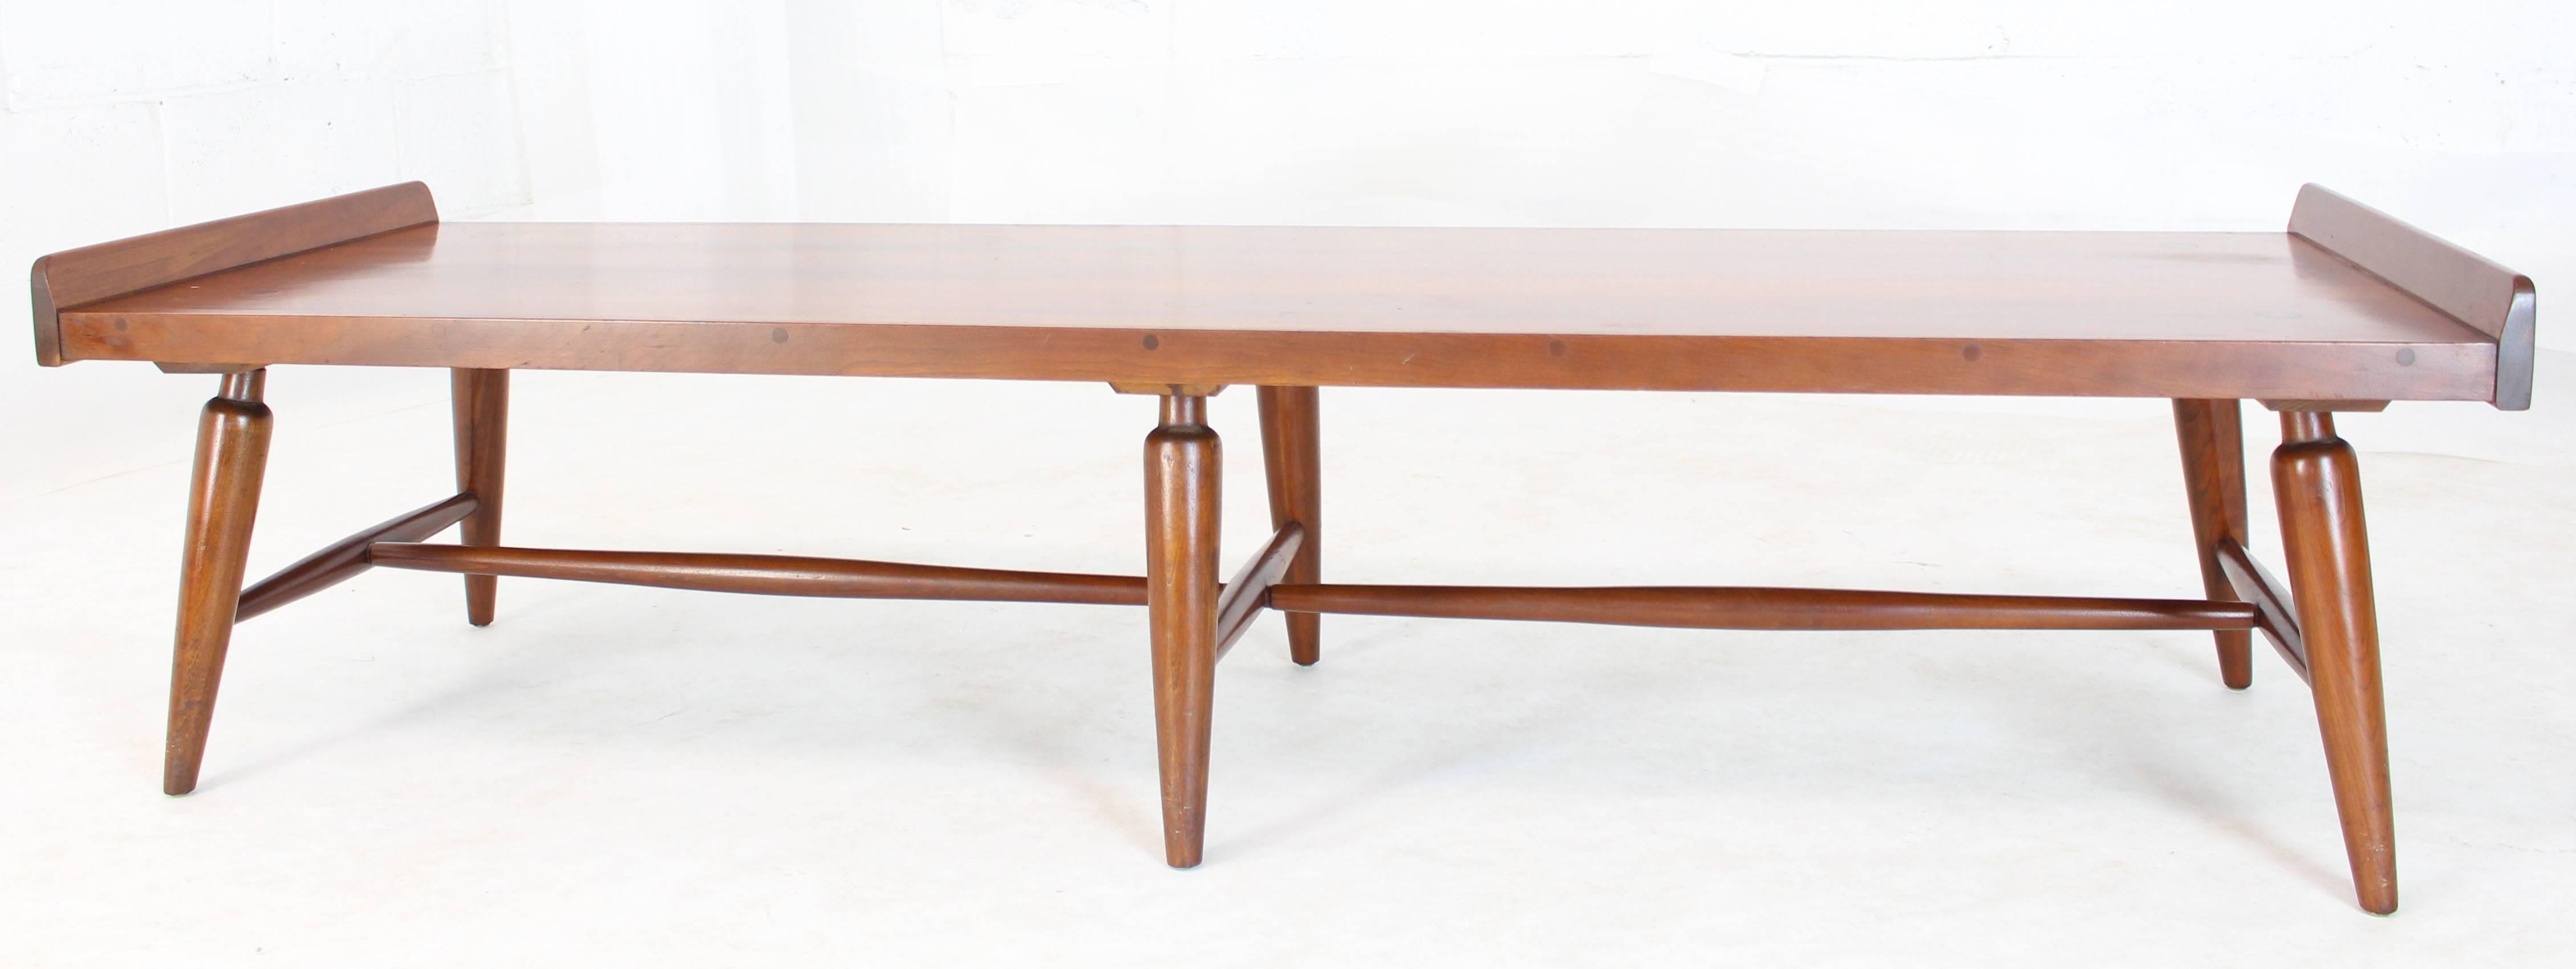 20th Century Solid Maple Six Legges Bench or Coffee Table with rolled edges